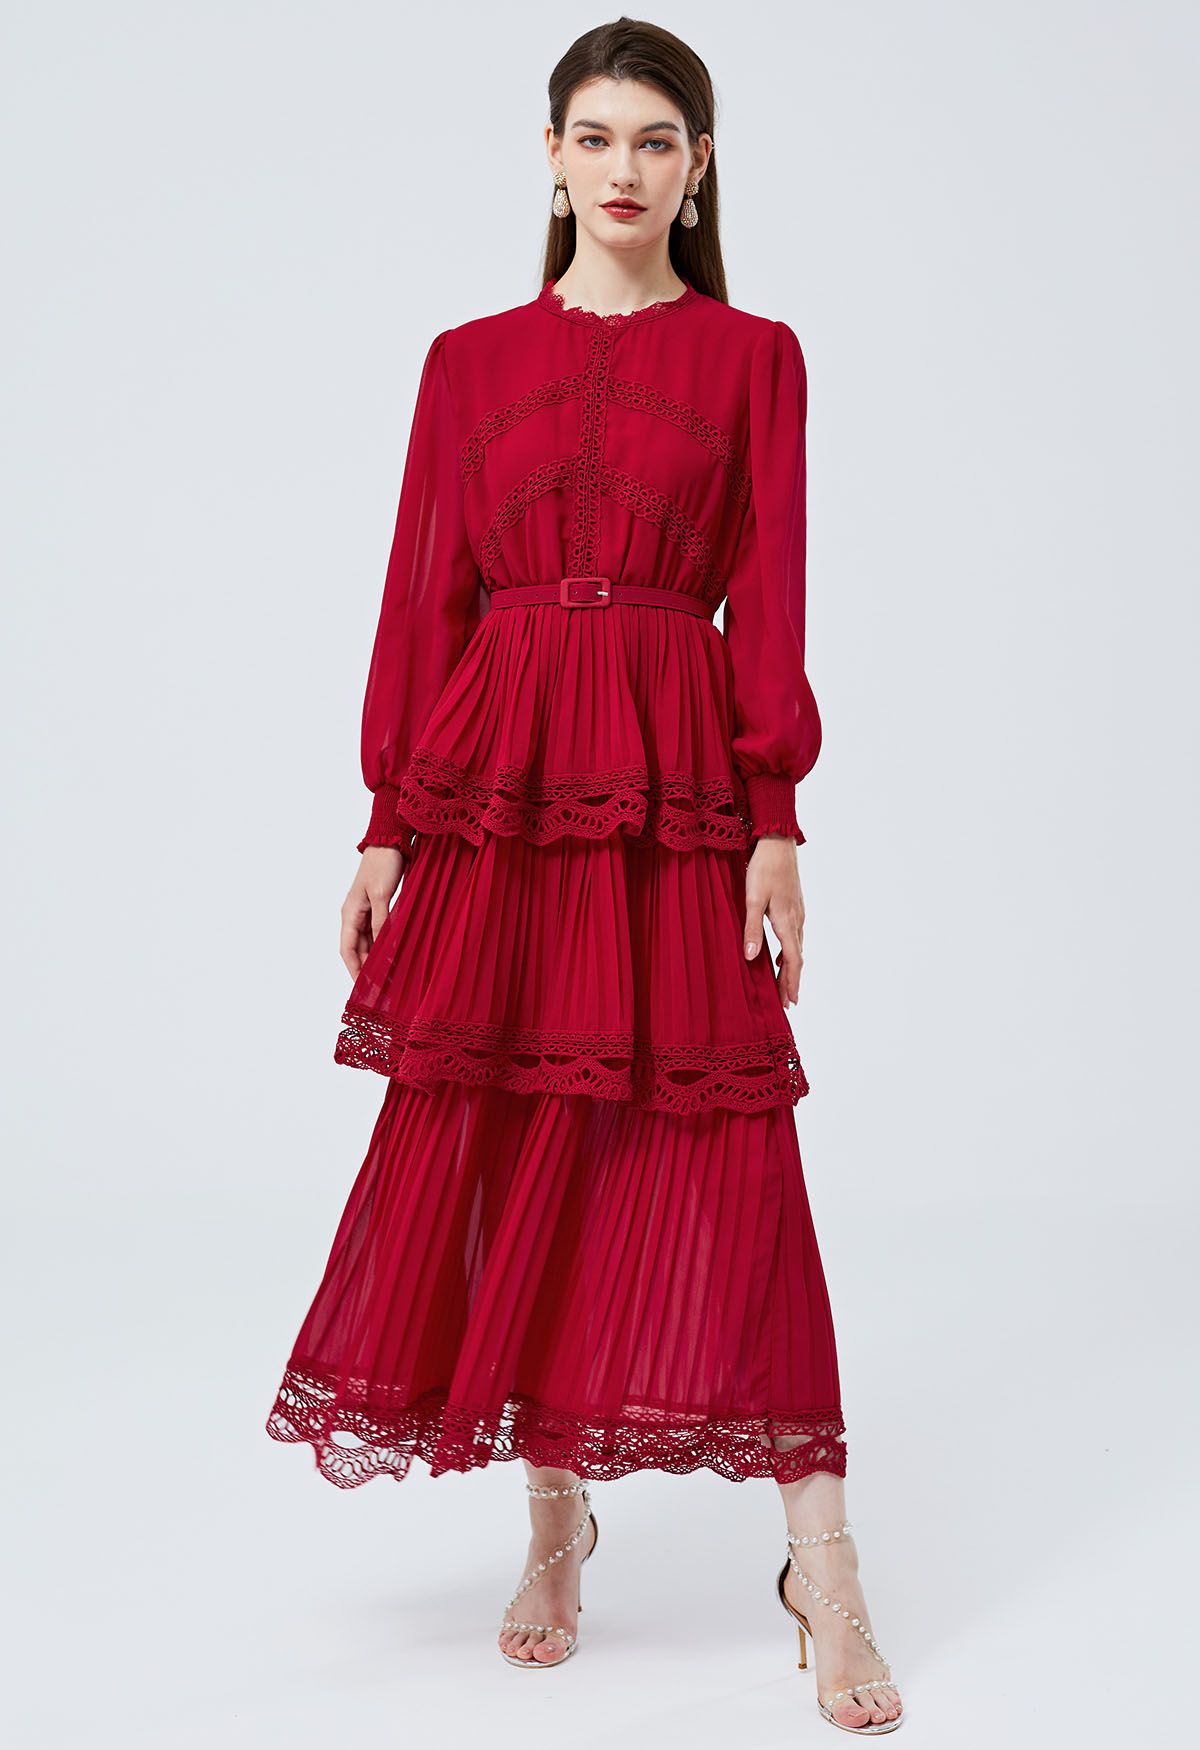 Crochet Lace Pleated Tiered Chiffon Maxi Dress in Red